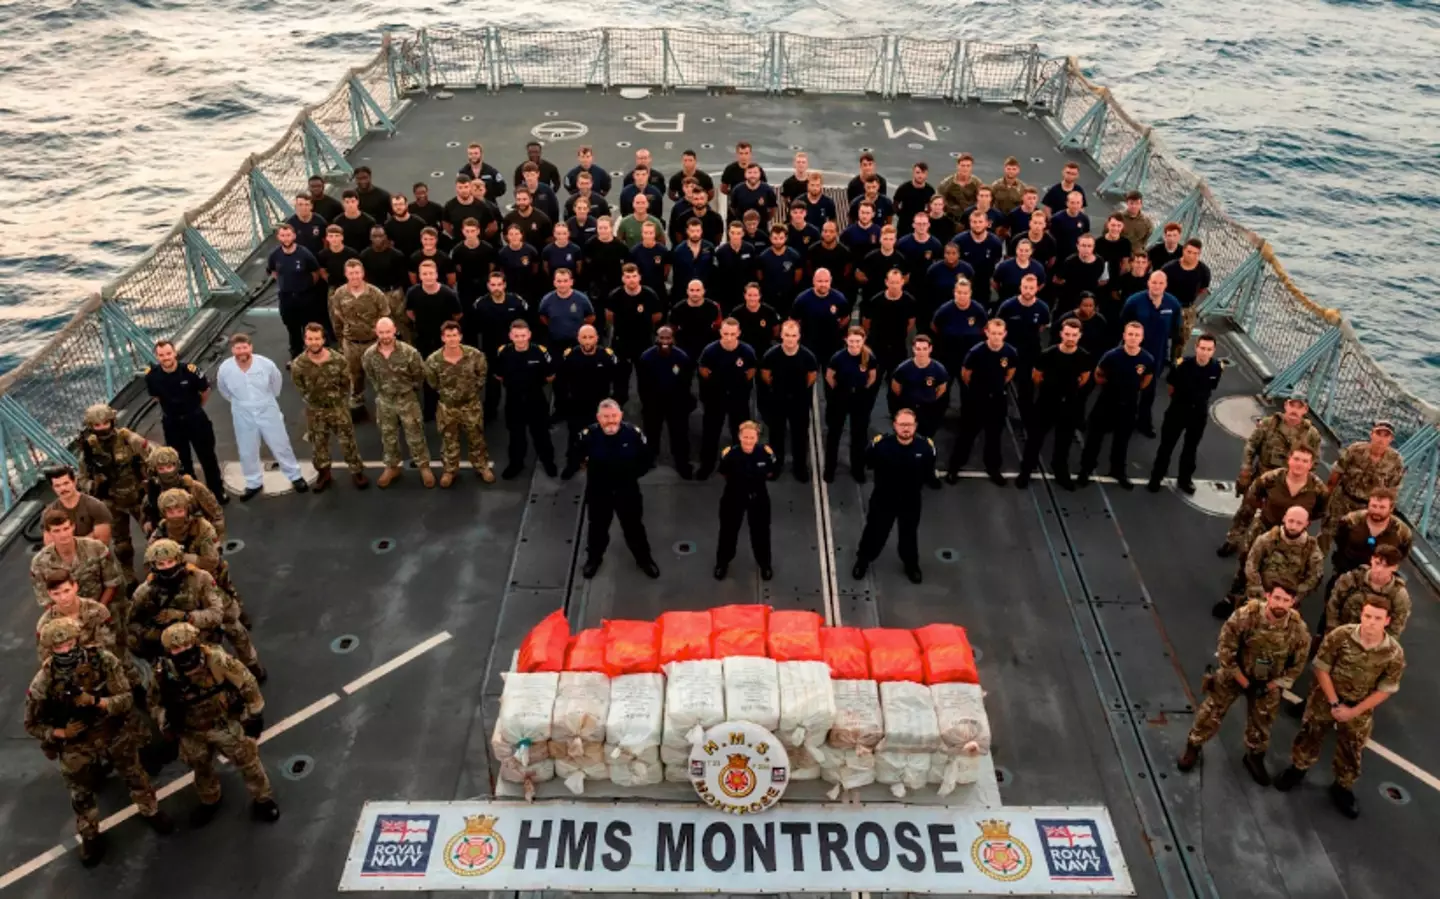 The crew of the HMS Montrose with mega drugs bust.